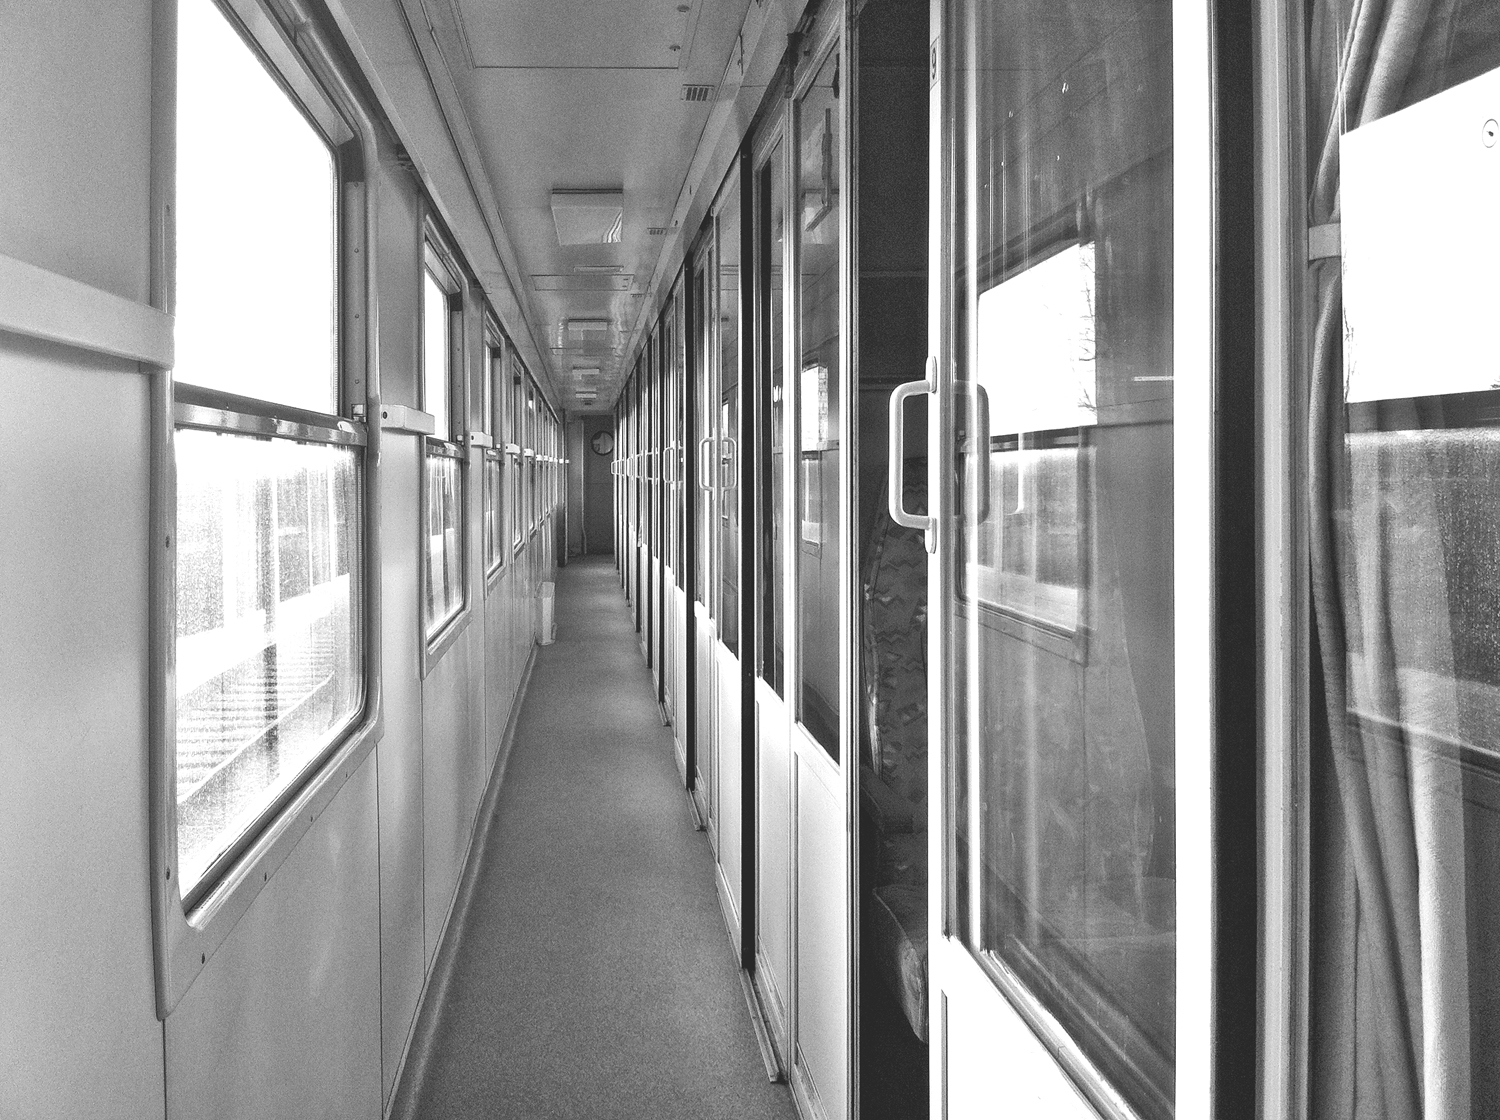 A photograph of a train corridor to illustrate the poem "Timothy Hawkins" by Rebecca L Brown, published in issue 33 of Neon